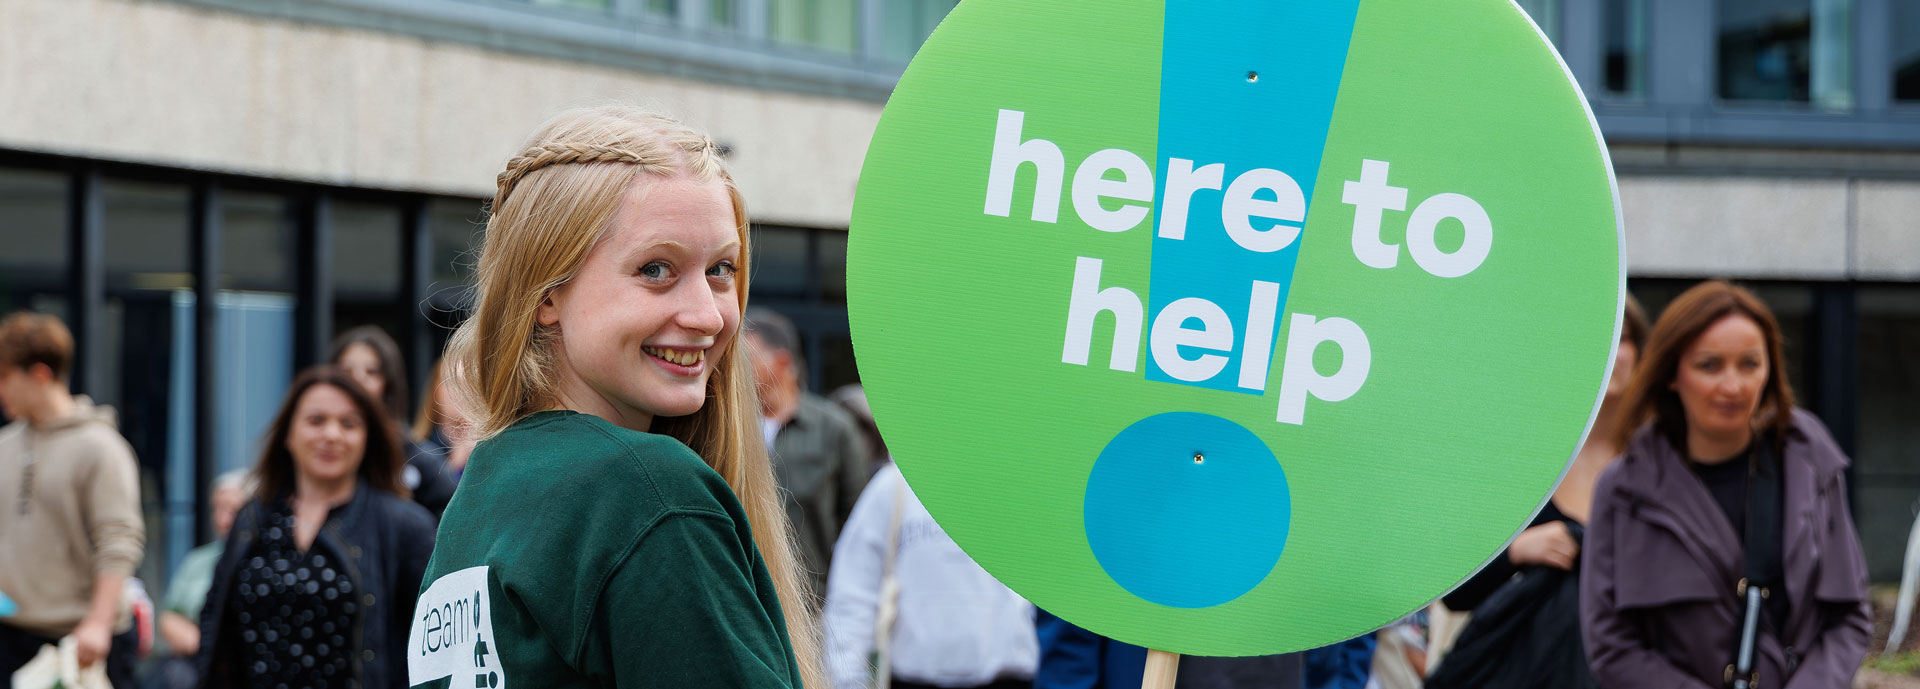 A student ambassador holding a 'here to help' sign